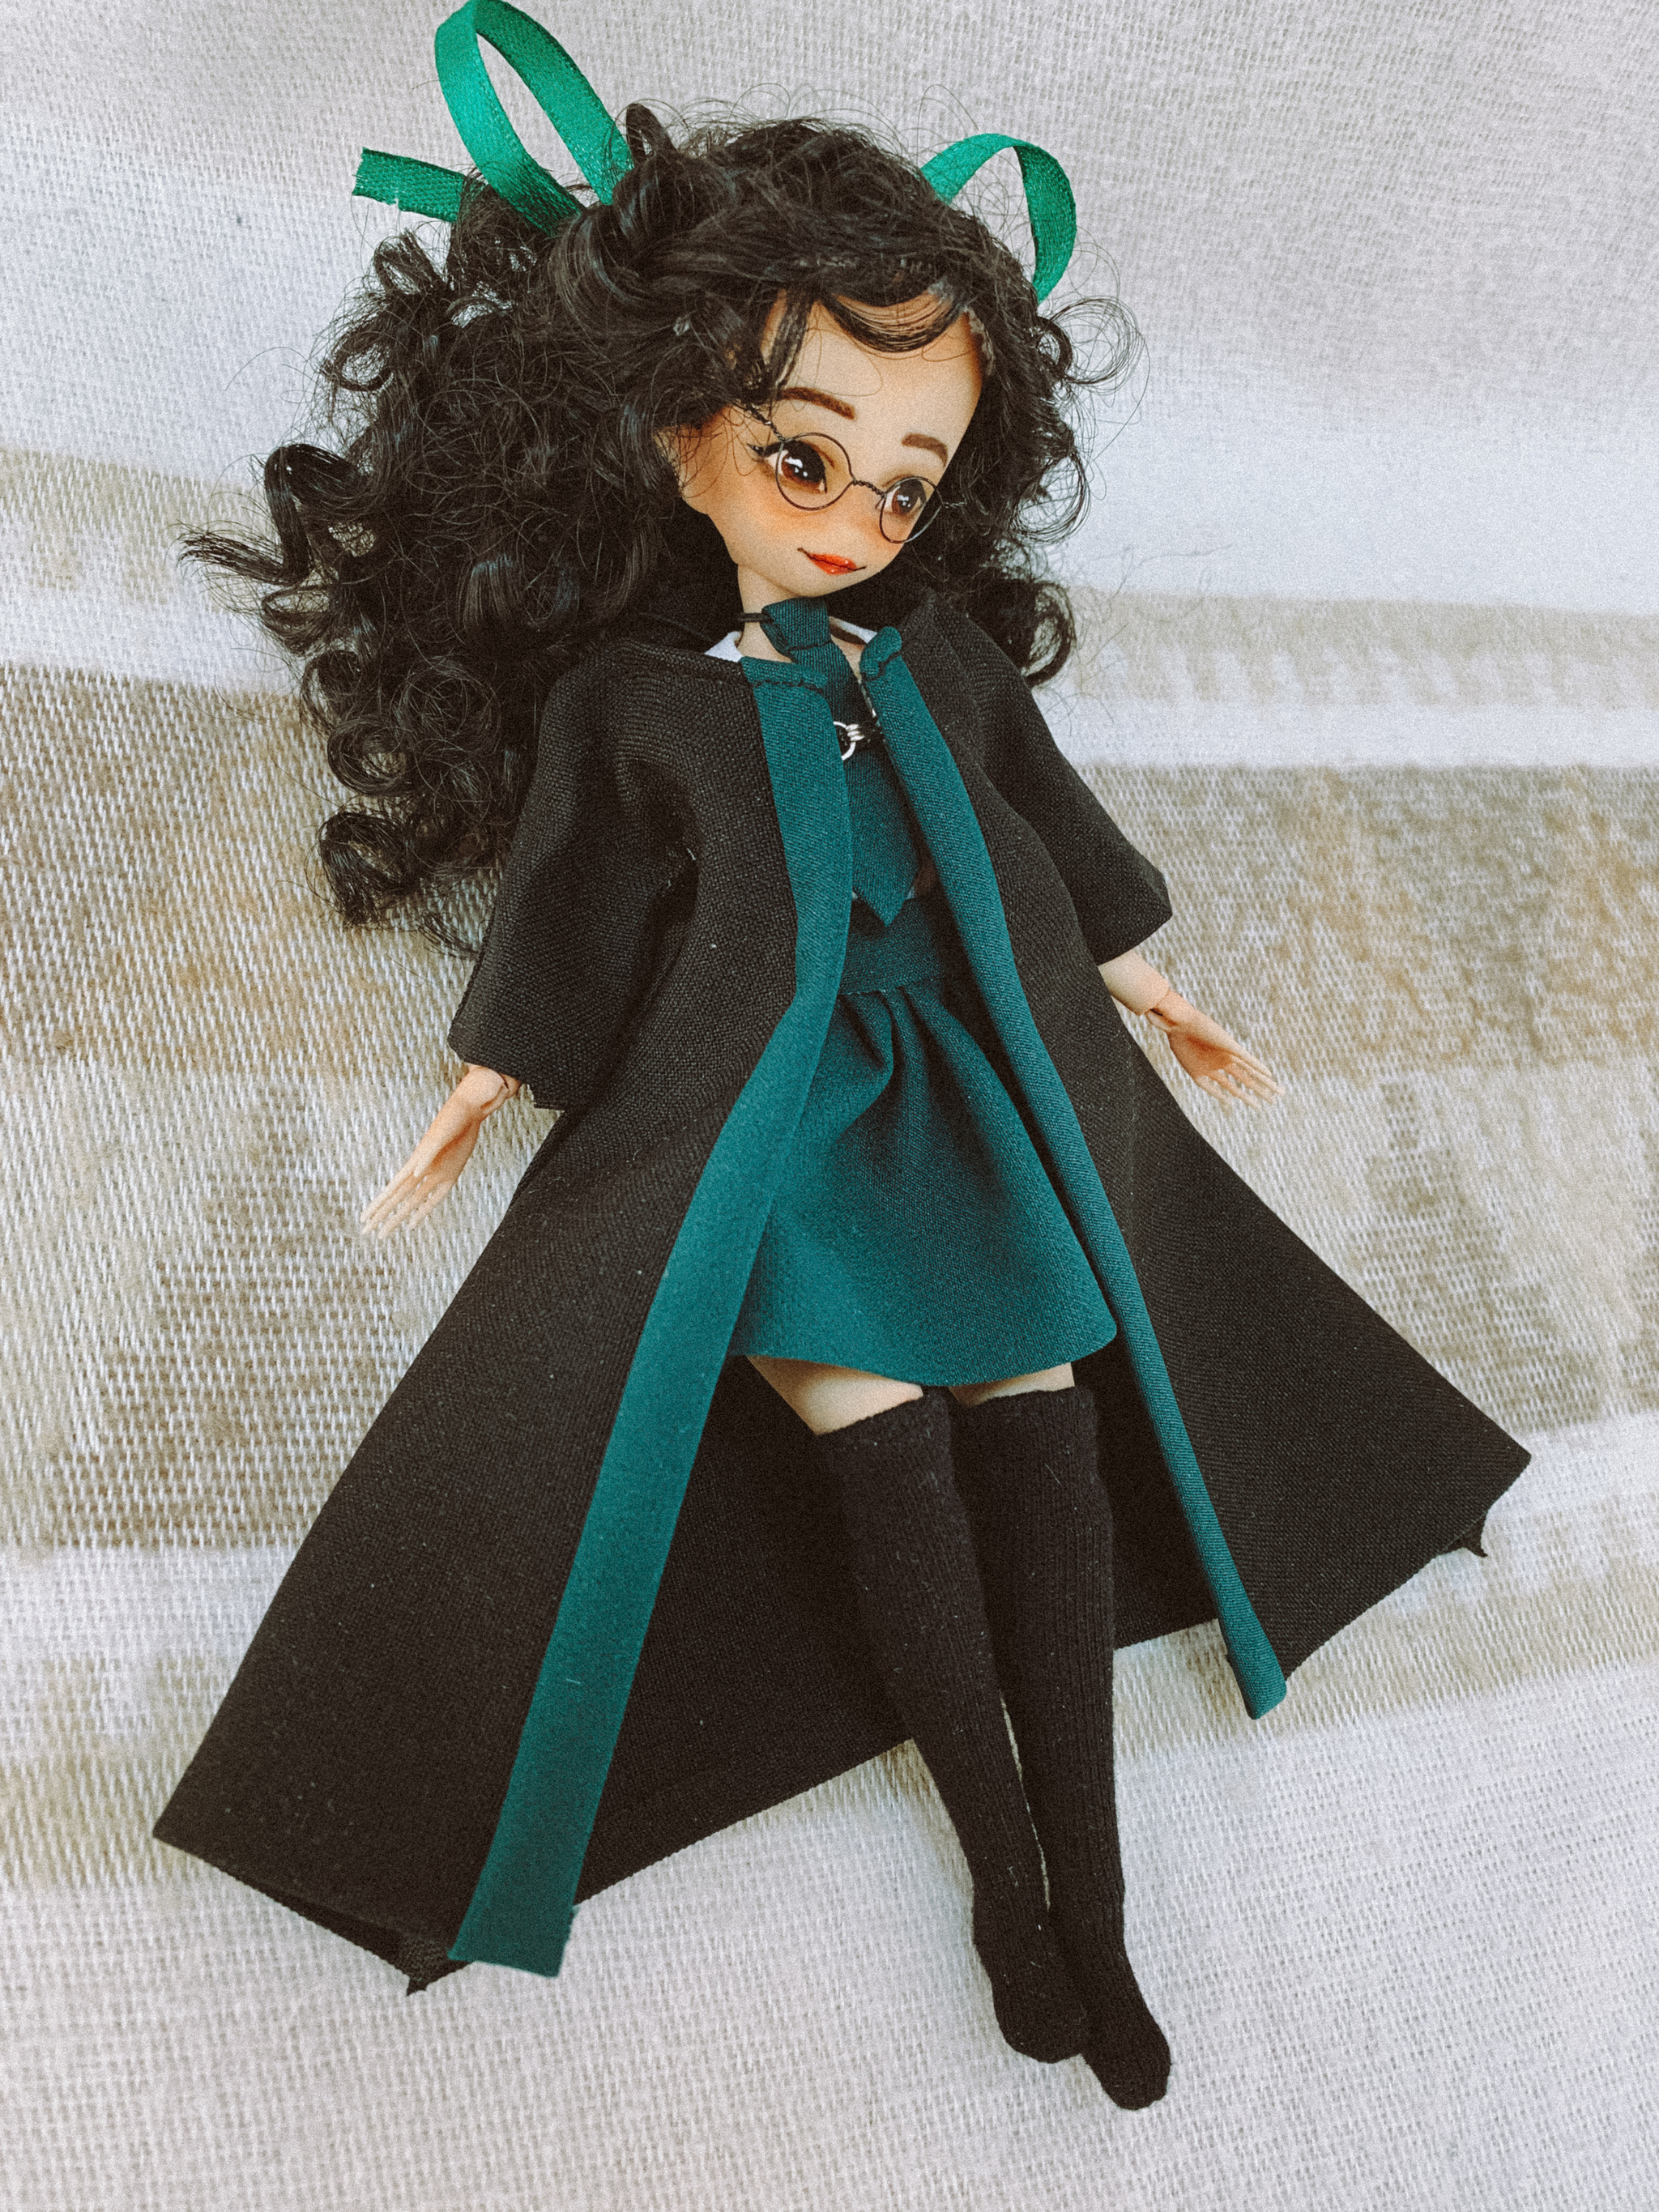 Puppet Slytherin - My, Hobby, Needlework, Jointed doll, Longpost, Harry Potter